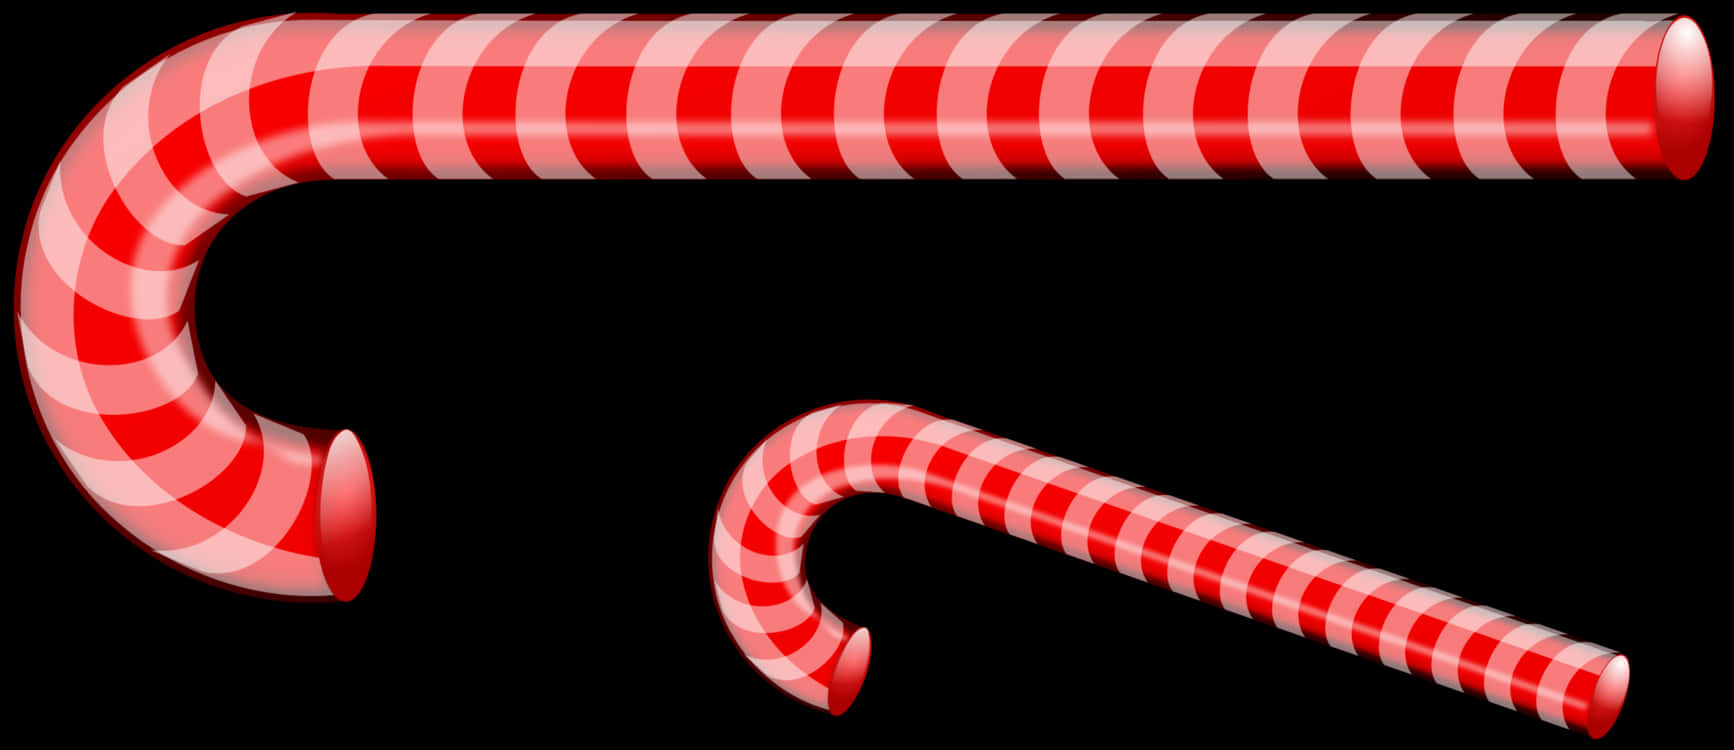 Red Striped Candy Cane Graphic PNG